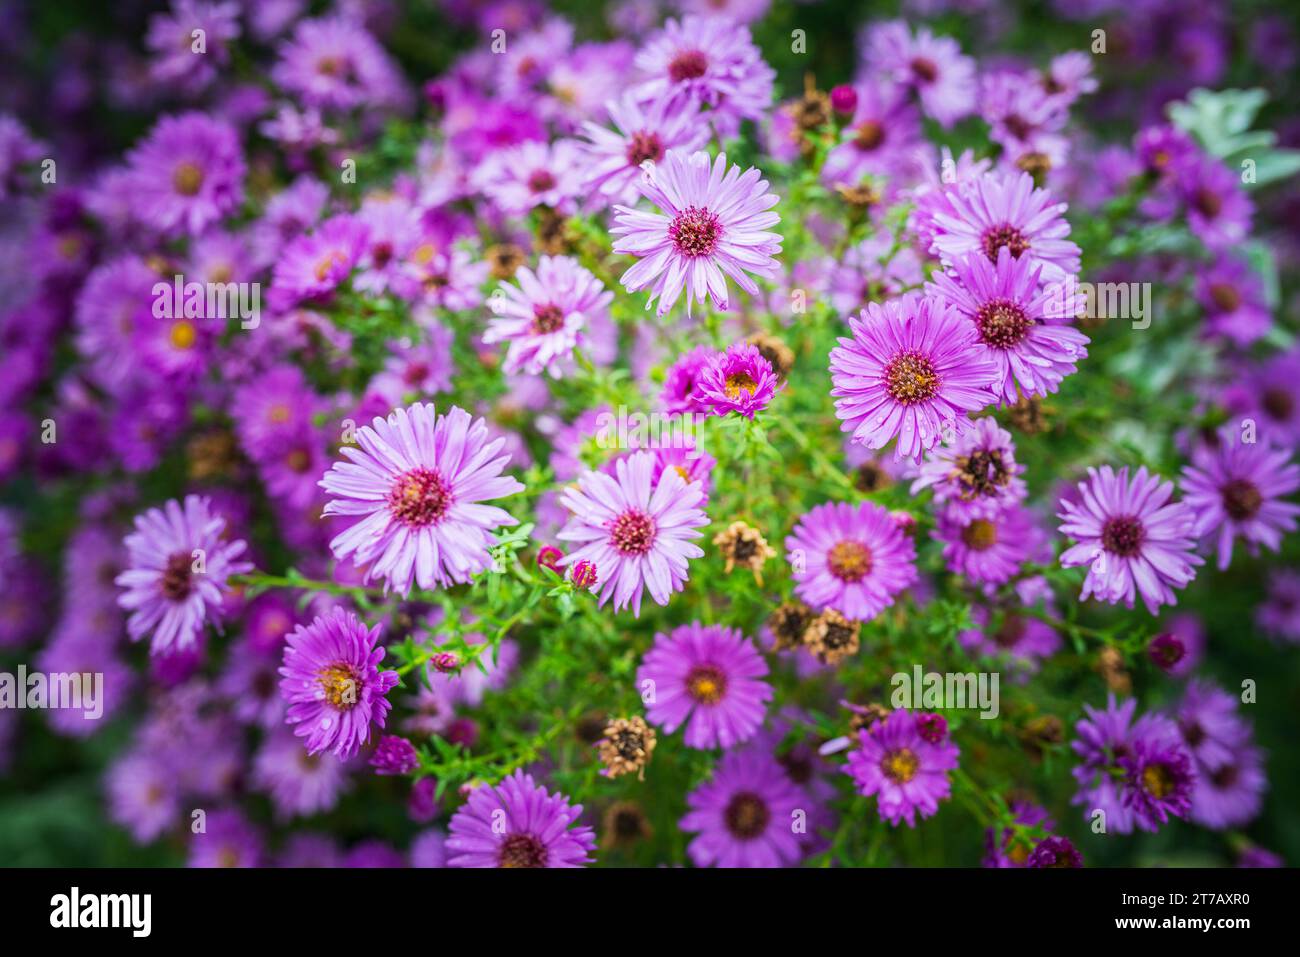 Symphyotrichum novi-belgii also known as New York Aster is the type species for Symphyotrichum, a genus of the family Asteraceae whose species were on Stock Photo